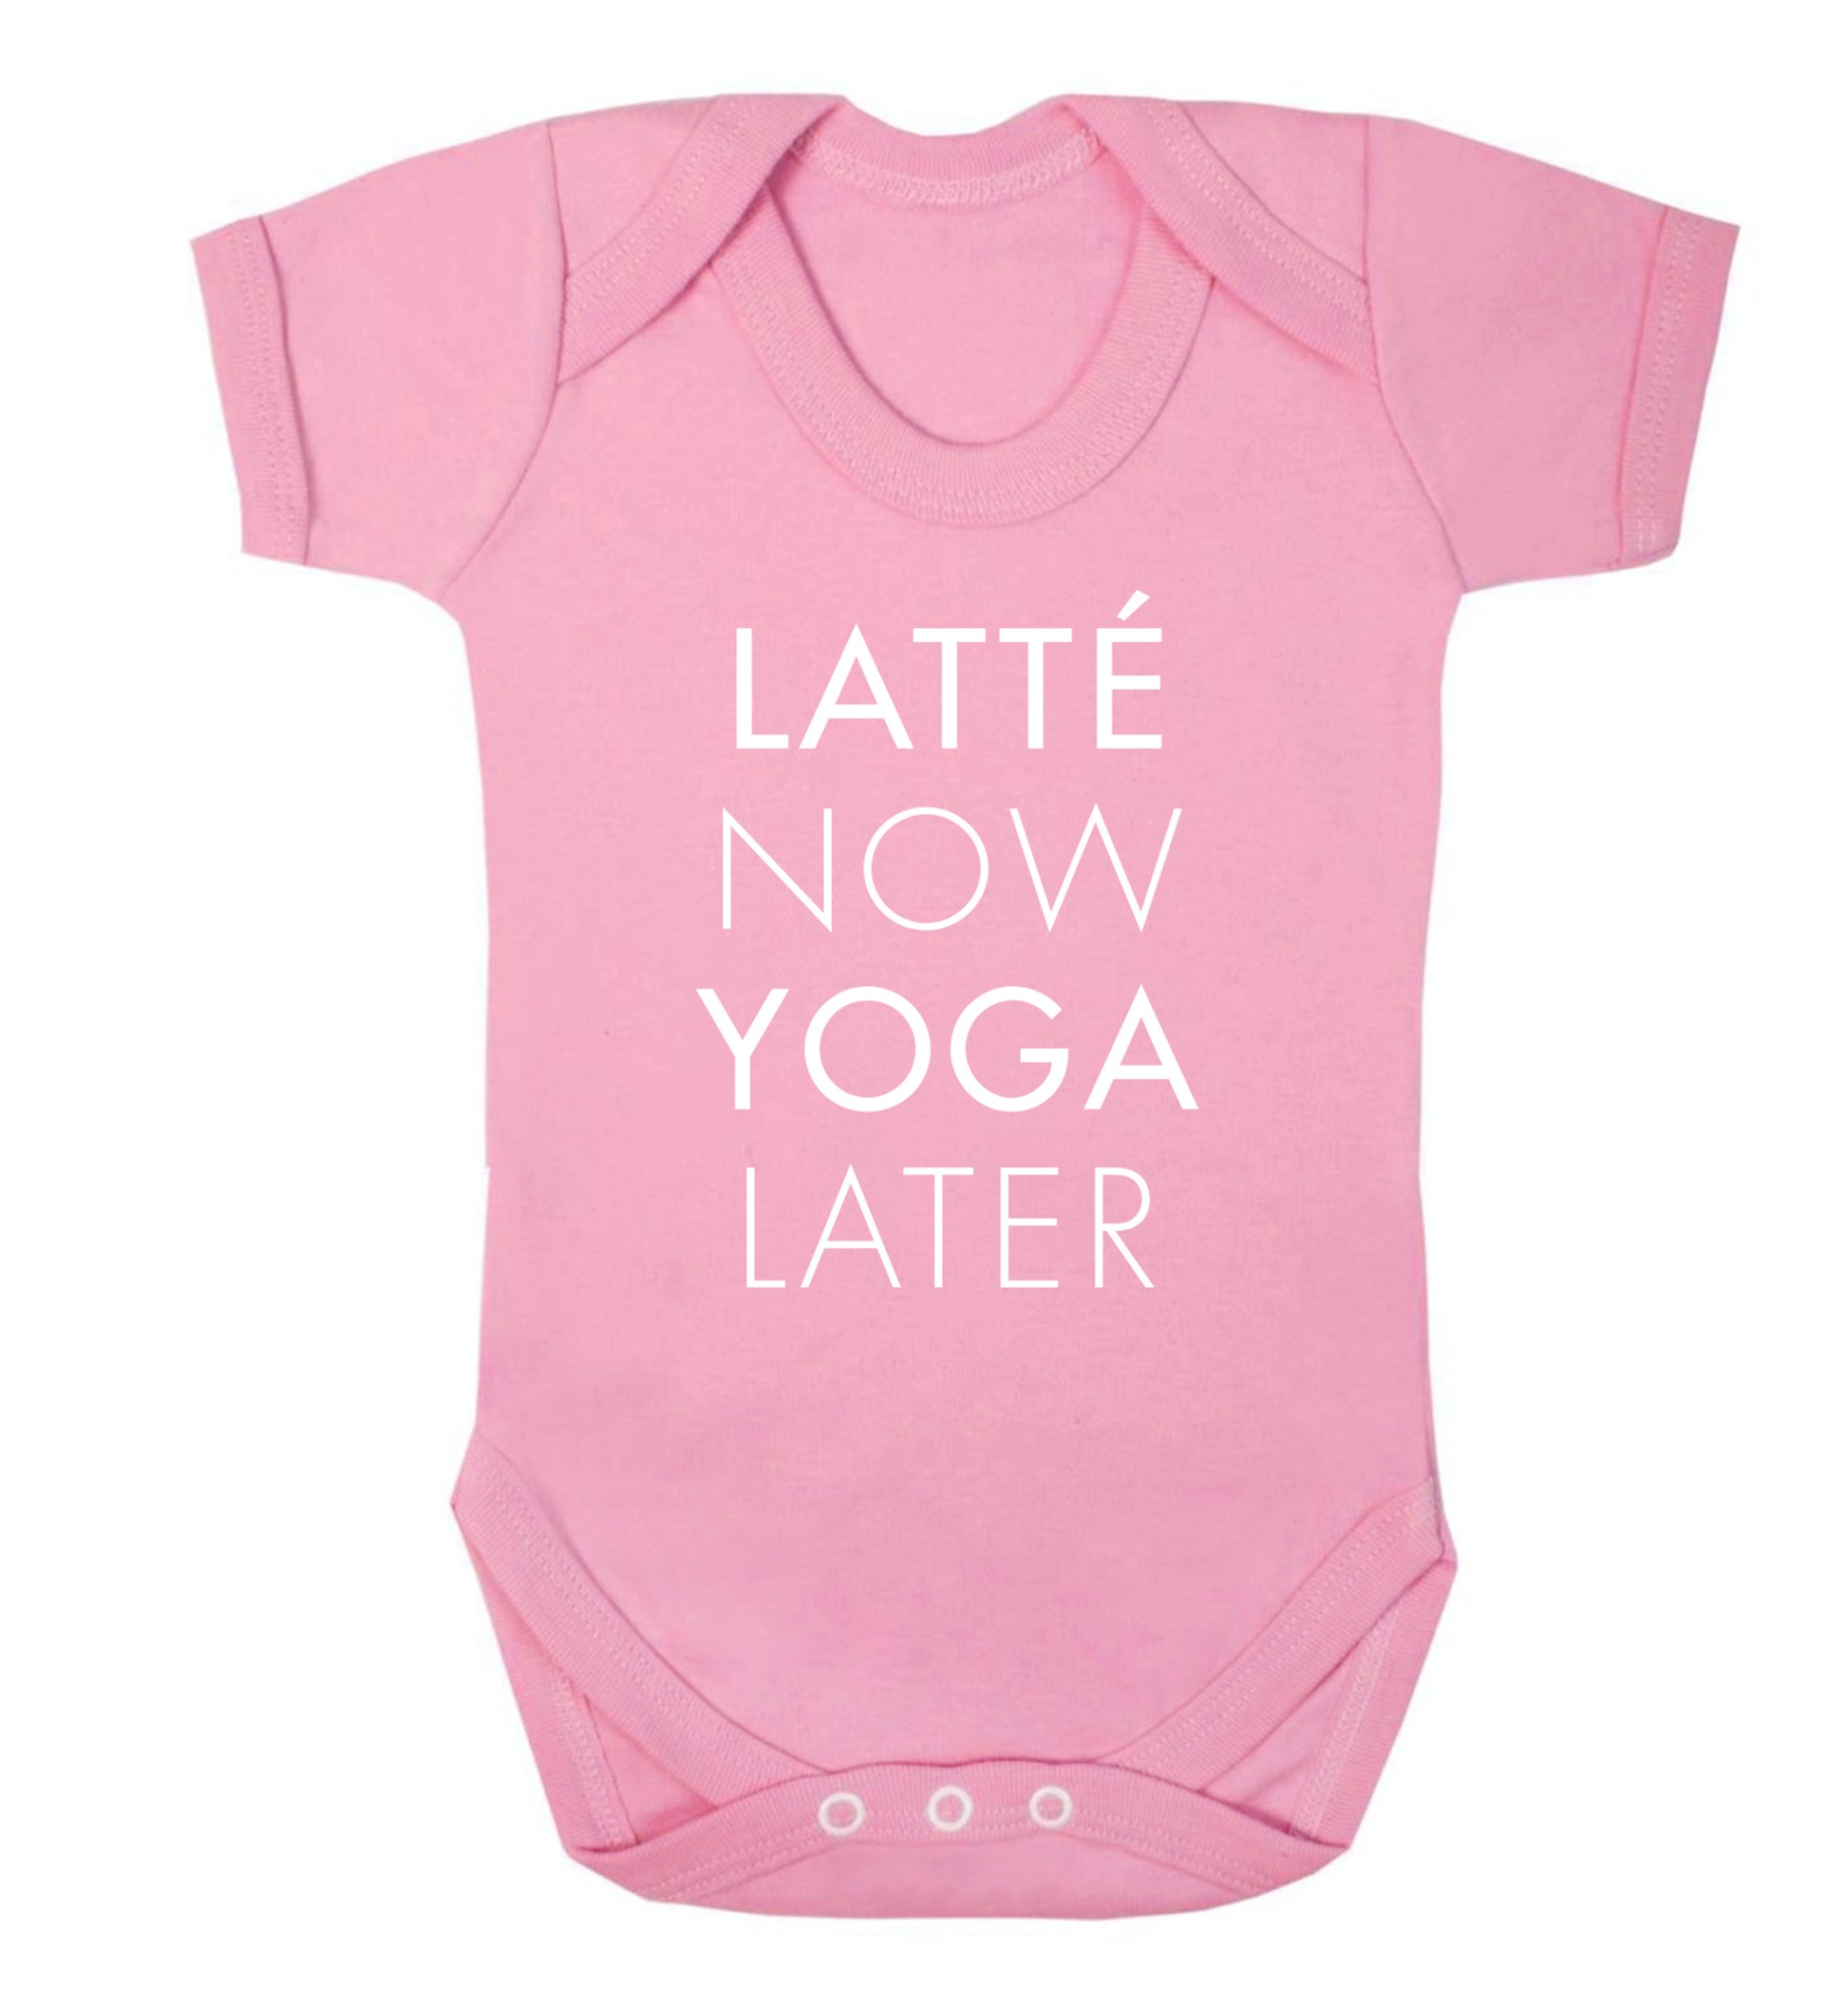 Latte now yoga later Baby Vest pale pink 18-24 months